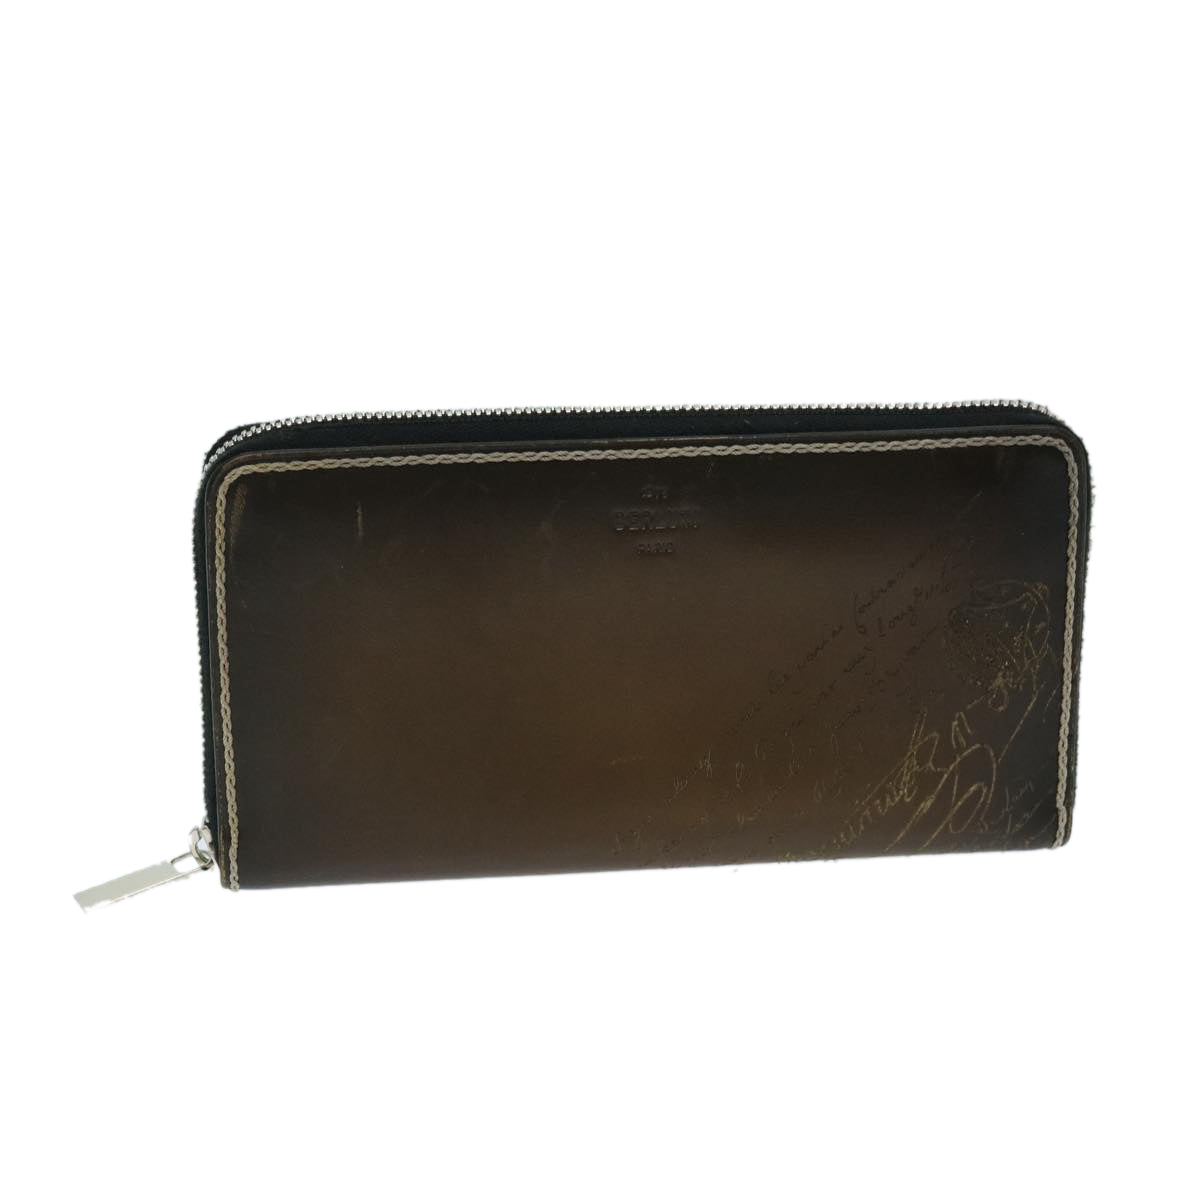 Berluti Calligraphy Long Wallet Leather Brown Auth am5861